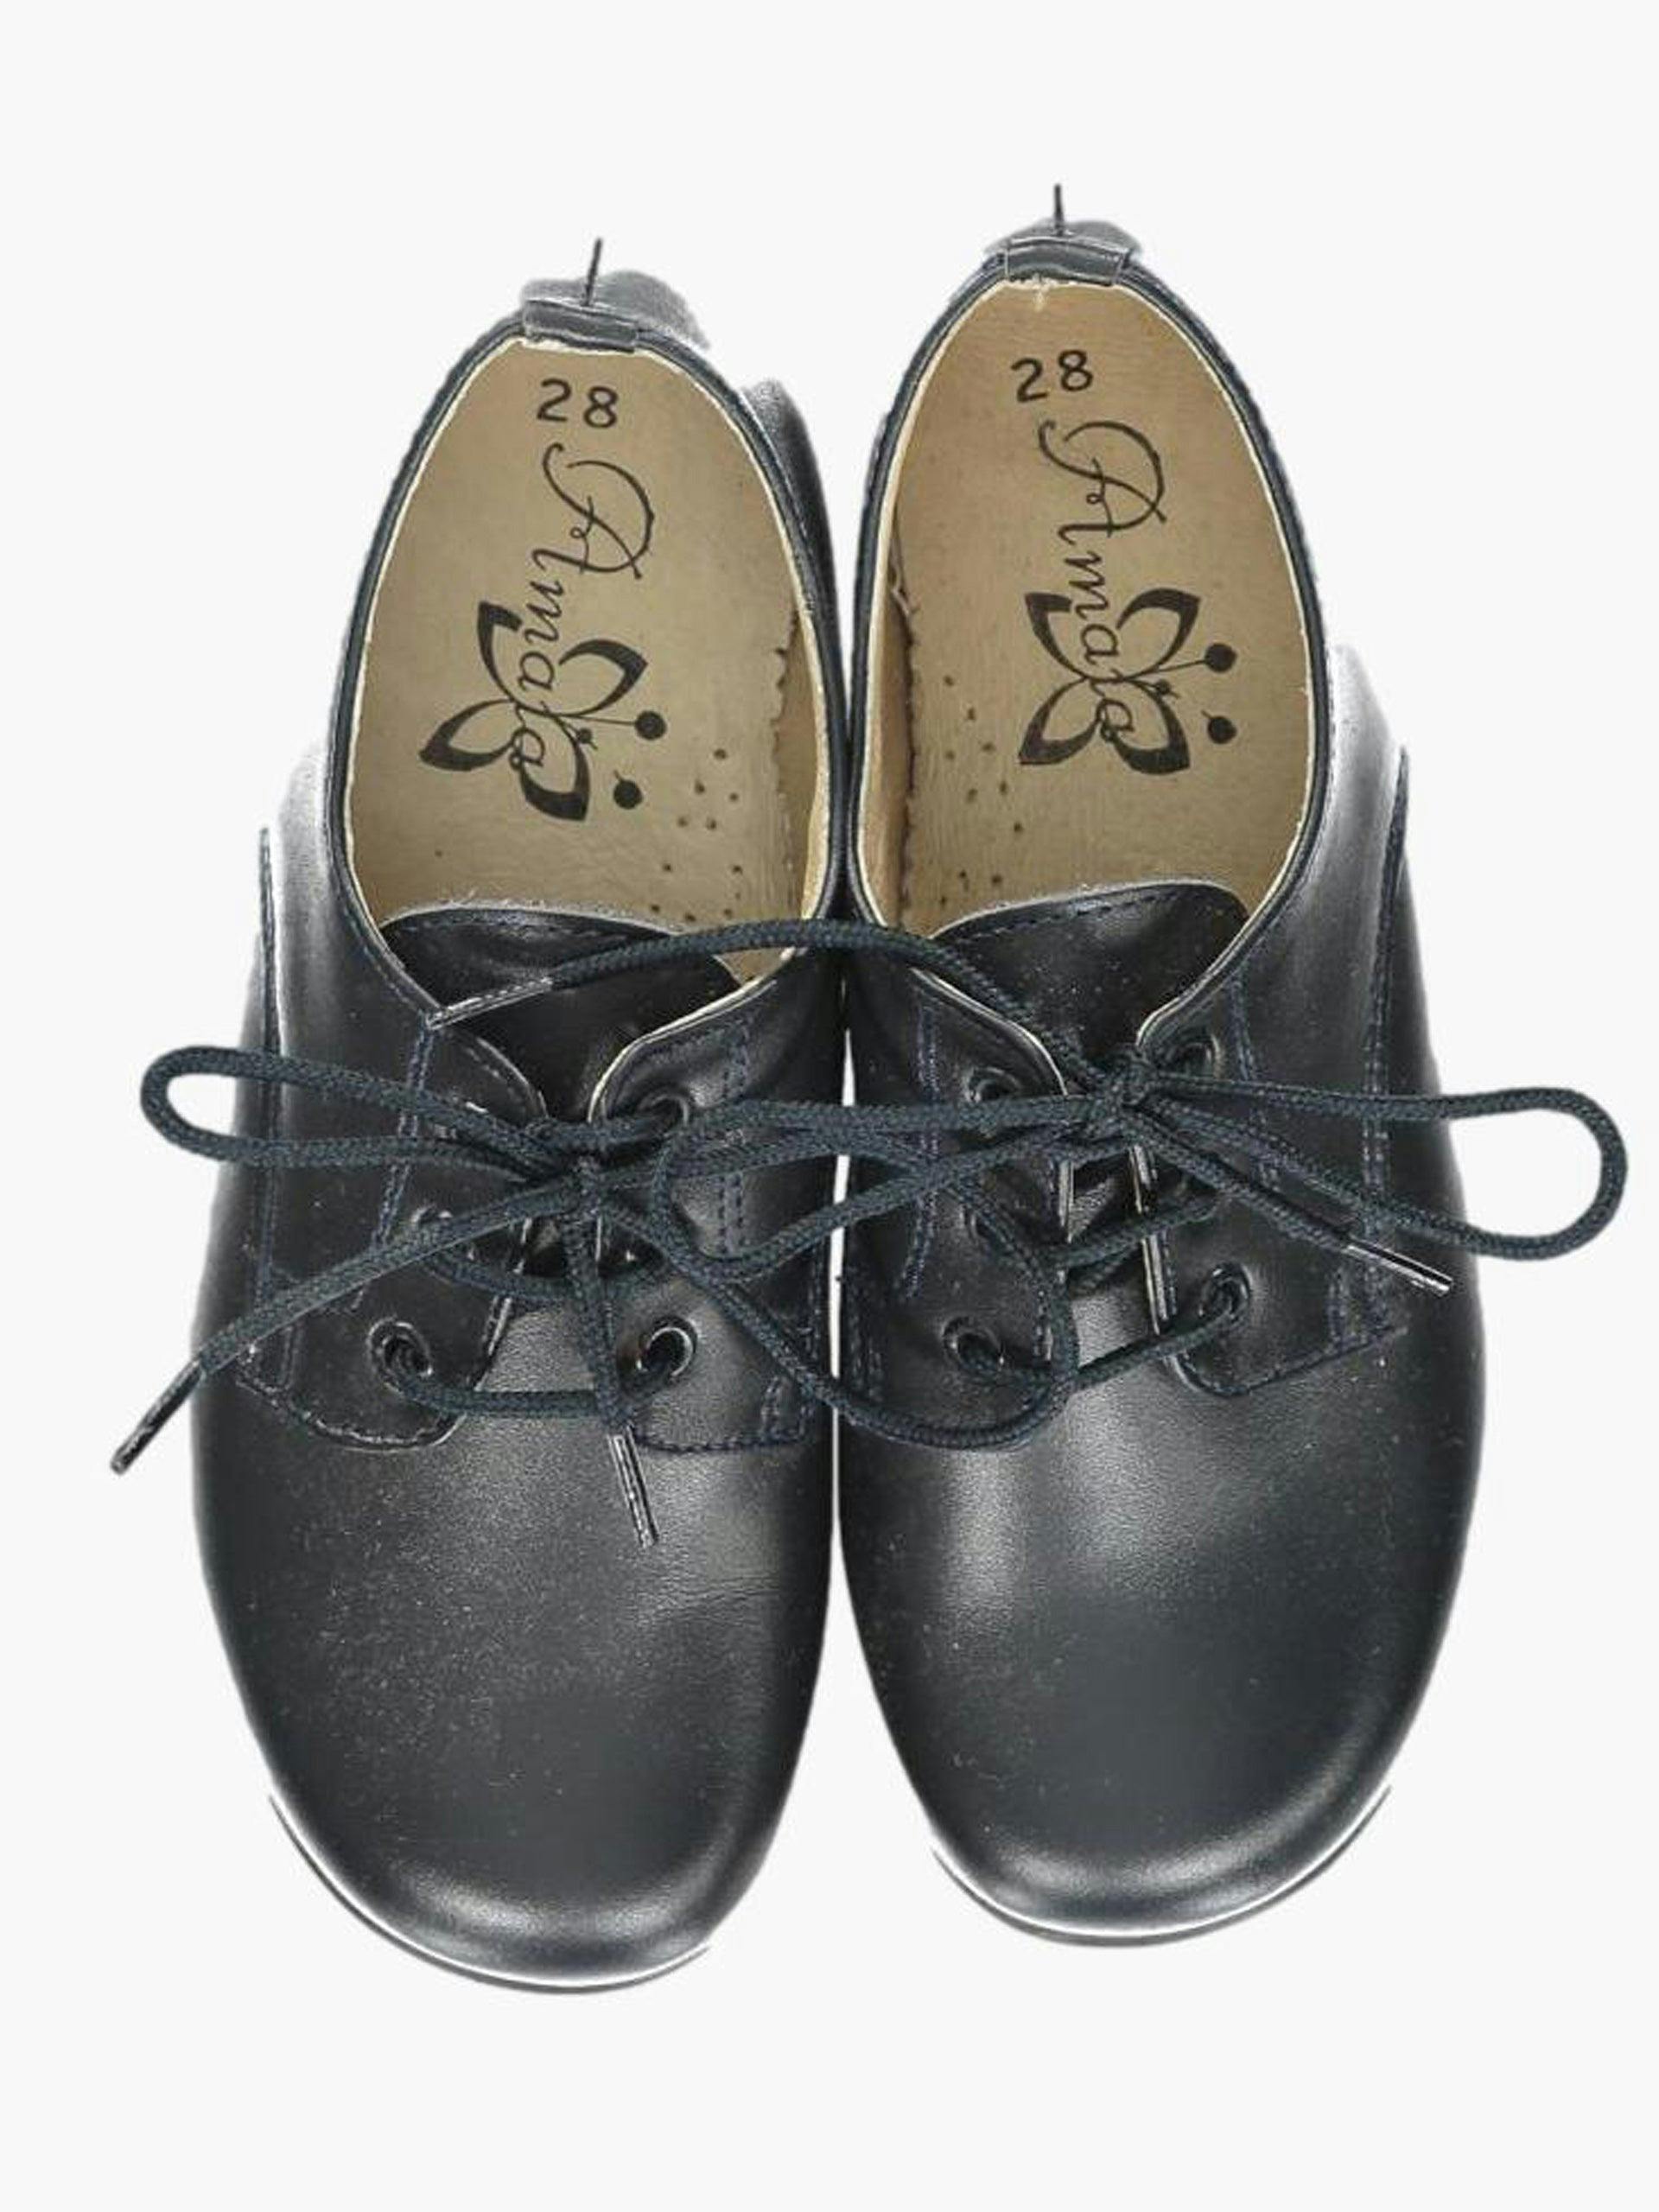 Blue lace-up leather shoes